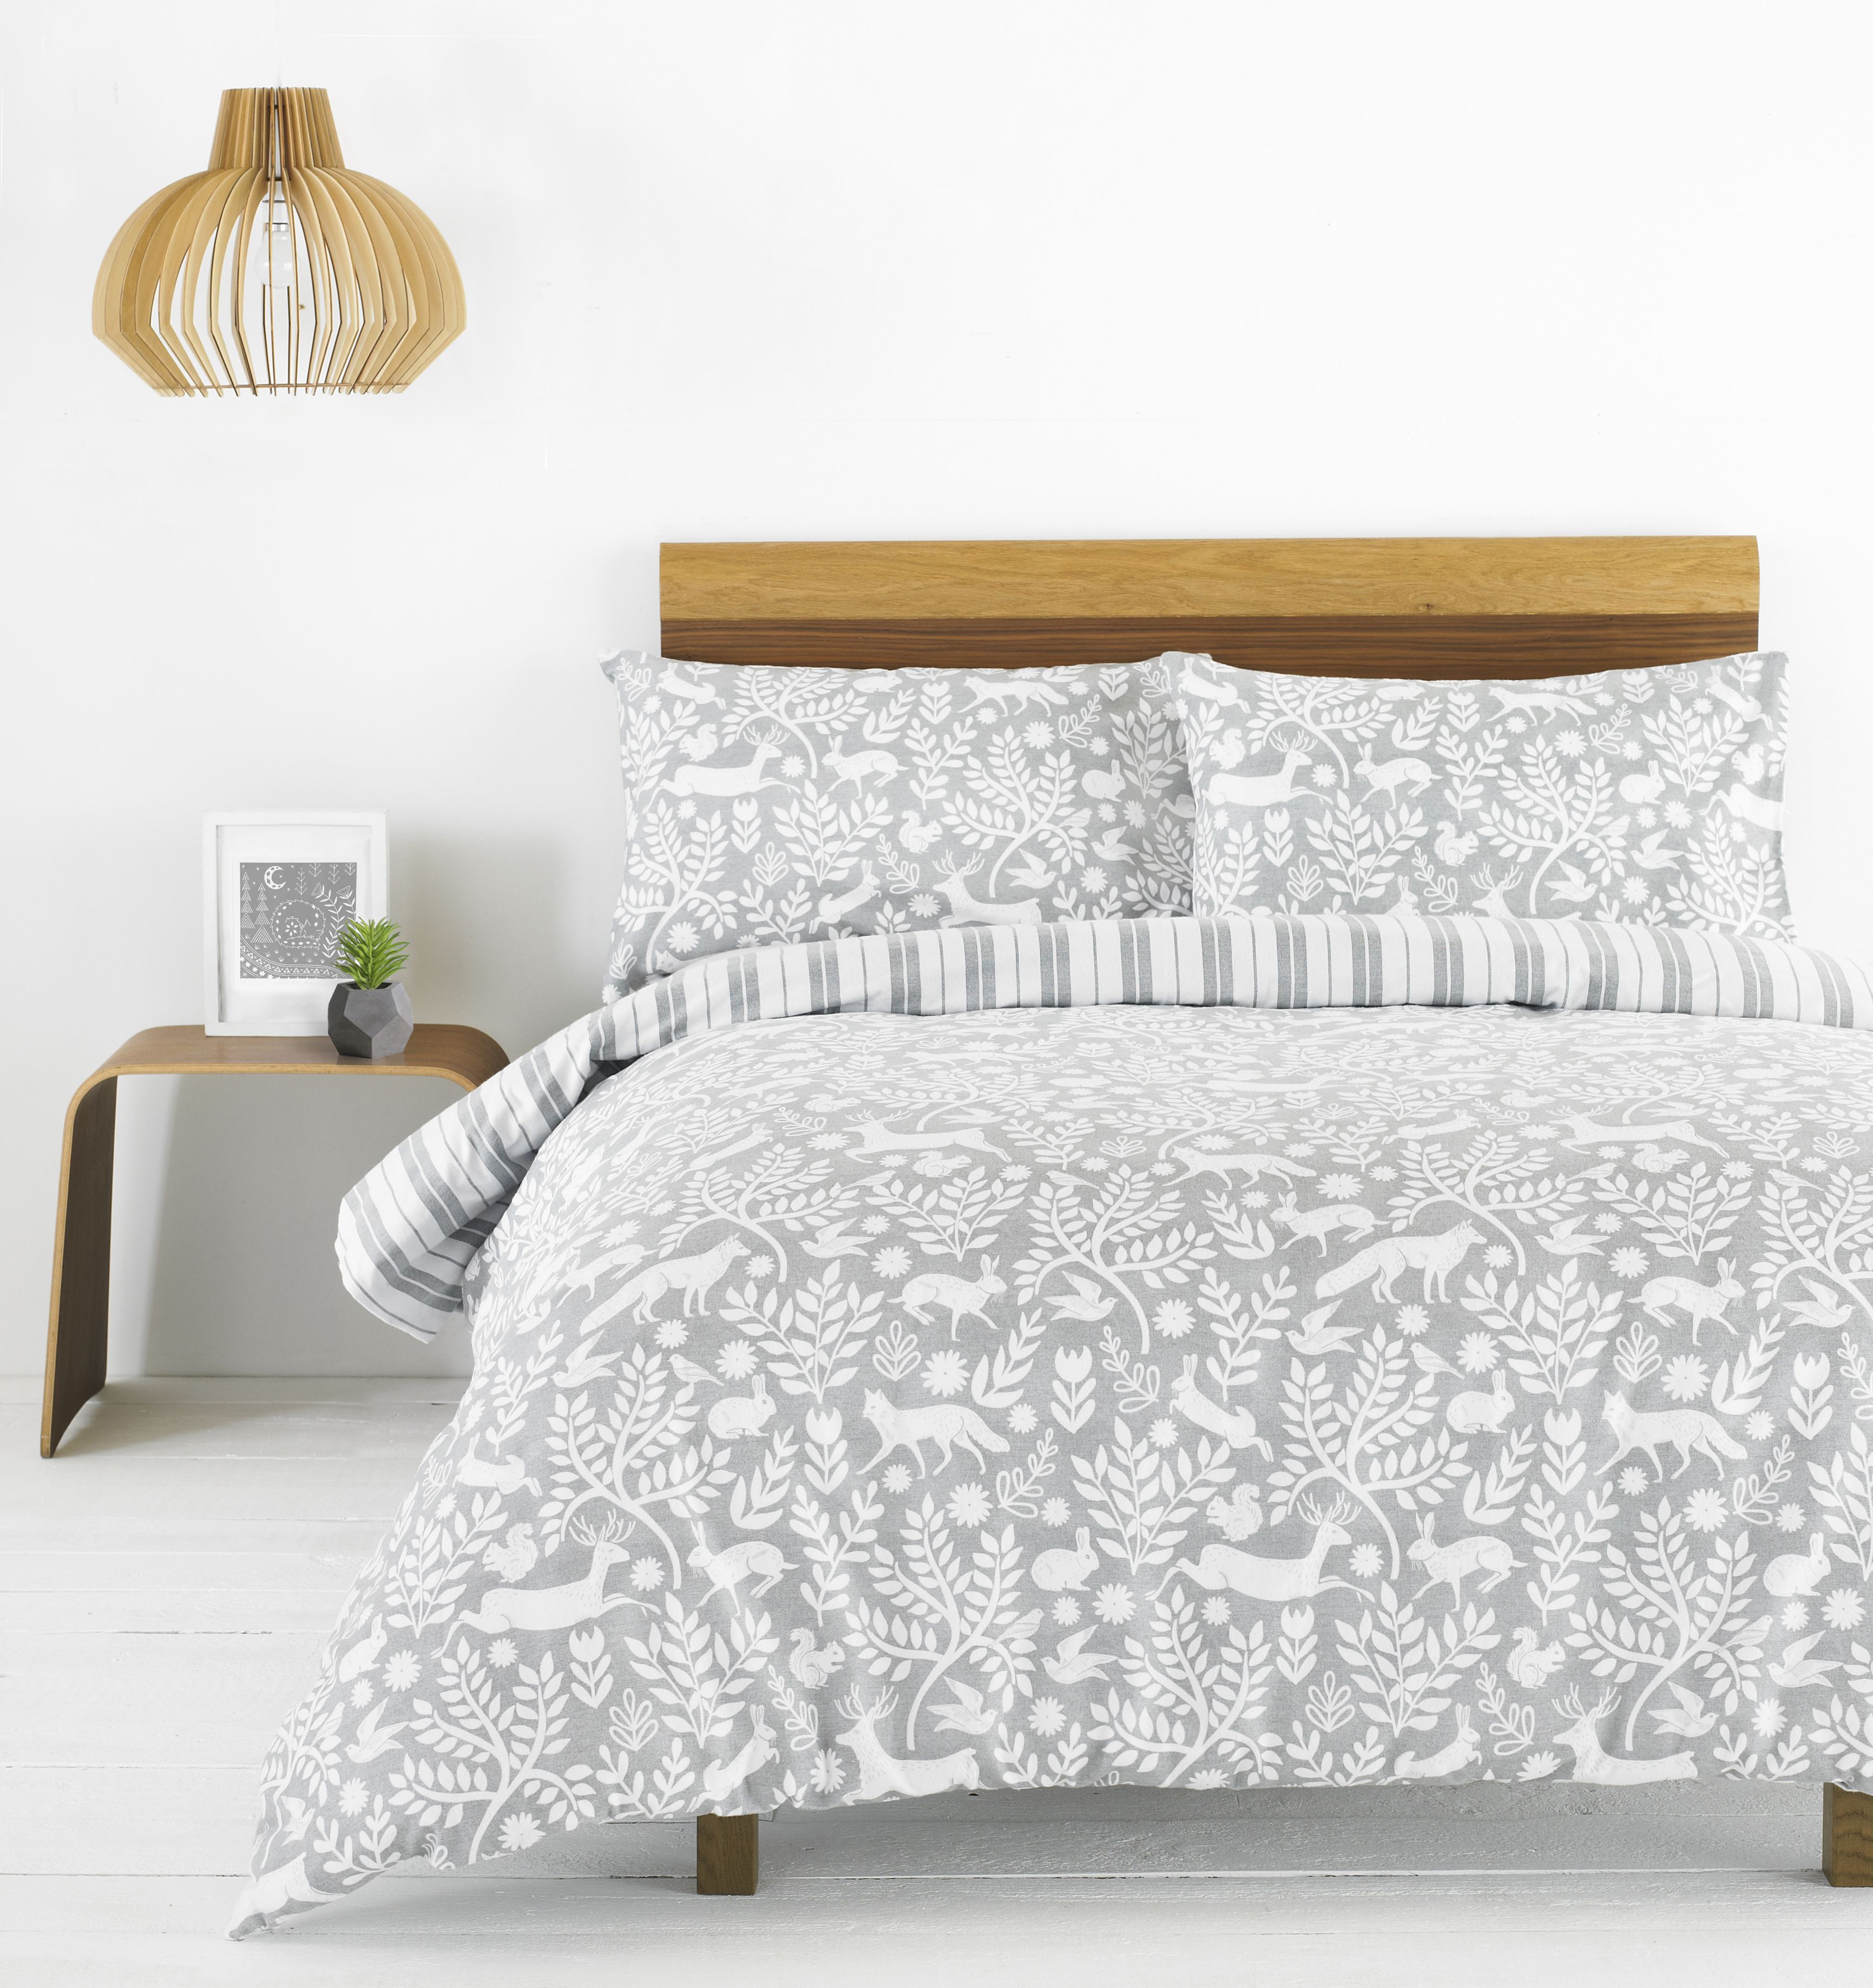 The Paoletti Skandi Woodland duvet cover set is a versatile piece during the colder seasons. Featuring an intricate design of woodland animals from hares to foxes intertwined with branches in a minimal colour scheme of grey and white it will match most home interiors. Perfect as a base to dress up with interesting textures and minimal colours. The unique design flows onto matching housewife pillowcases which each have an easy envelope closure. As this duvet cover set is made of beautiful 100% brushed cotton flannelette fabric you’ll be rushing to bed each night. Fully machine washable at 40 degrees this duvet cover is a breeze to take care of and is appropriate to tumble dry. Iron on a hot setting for the best results.